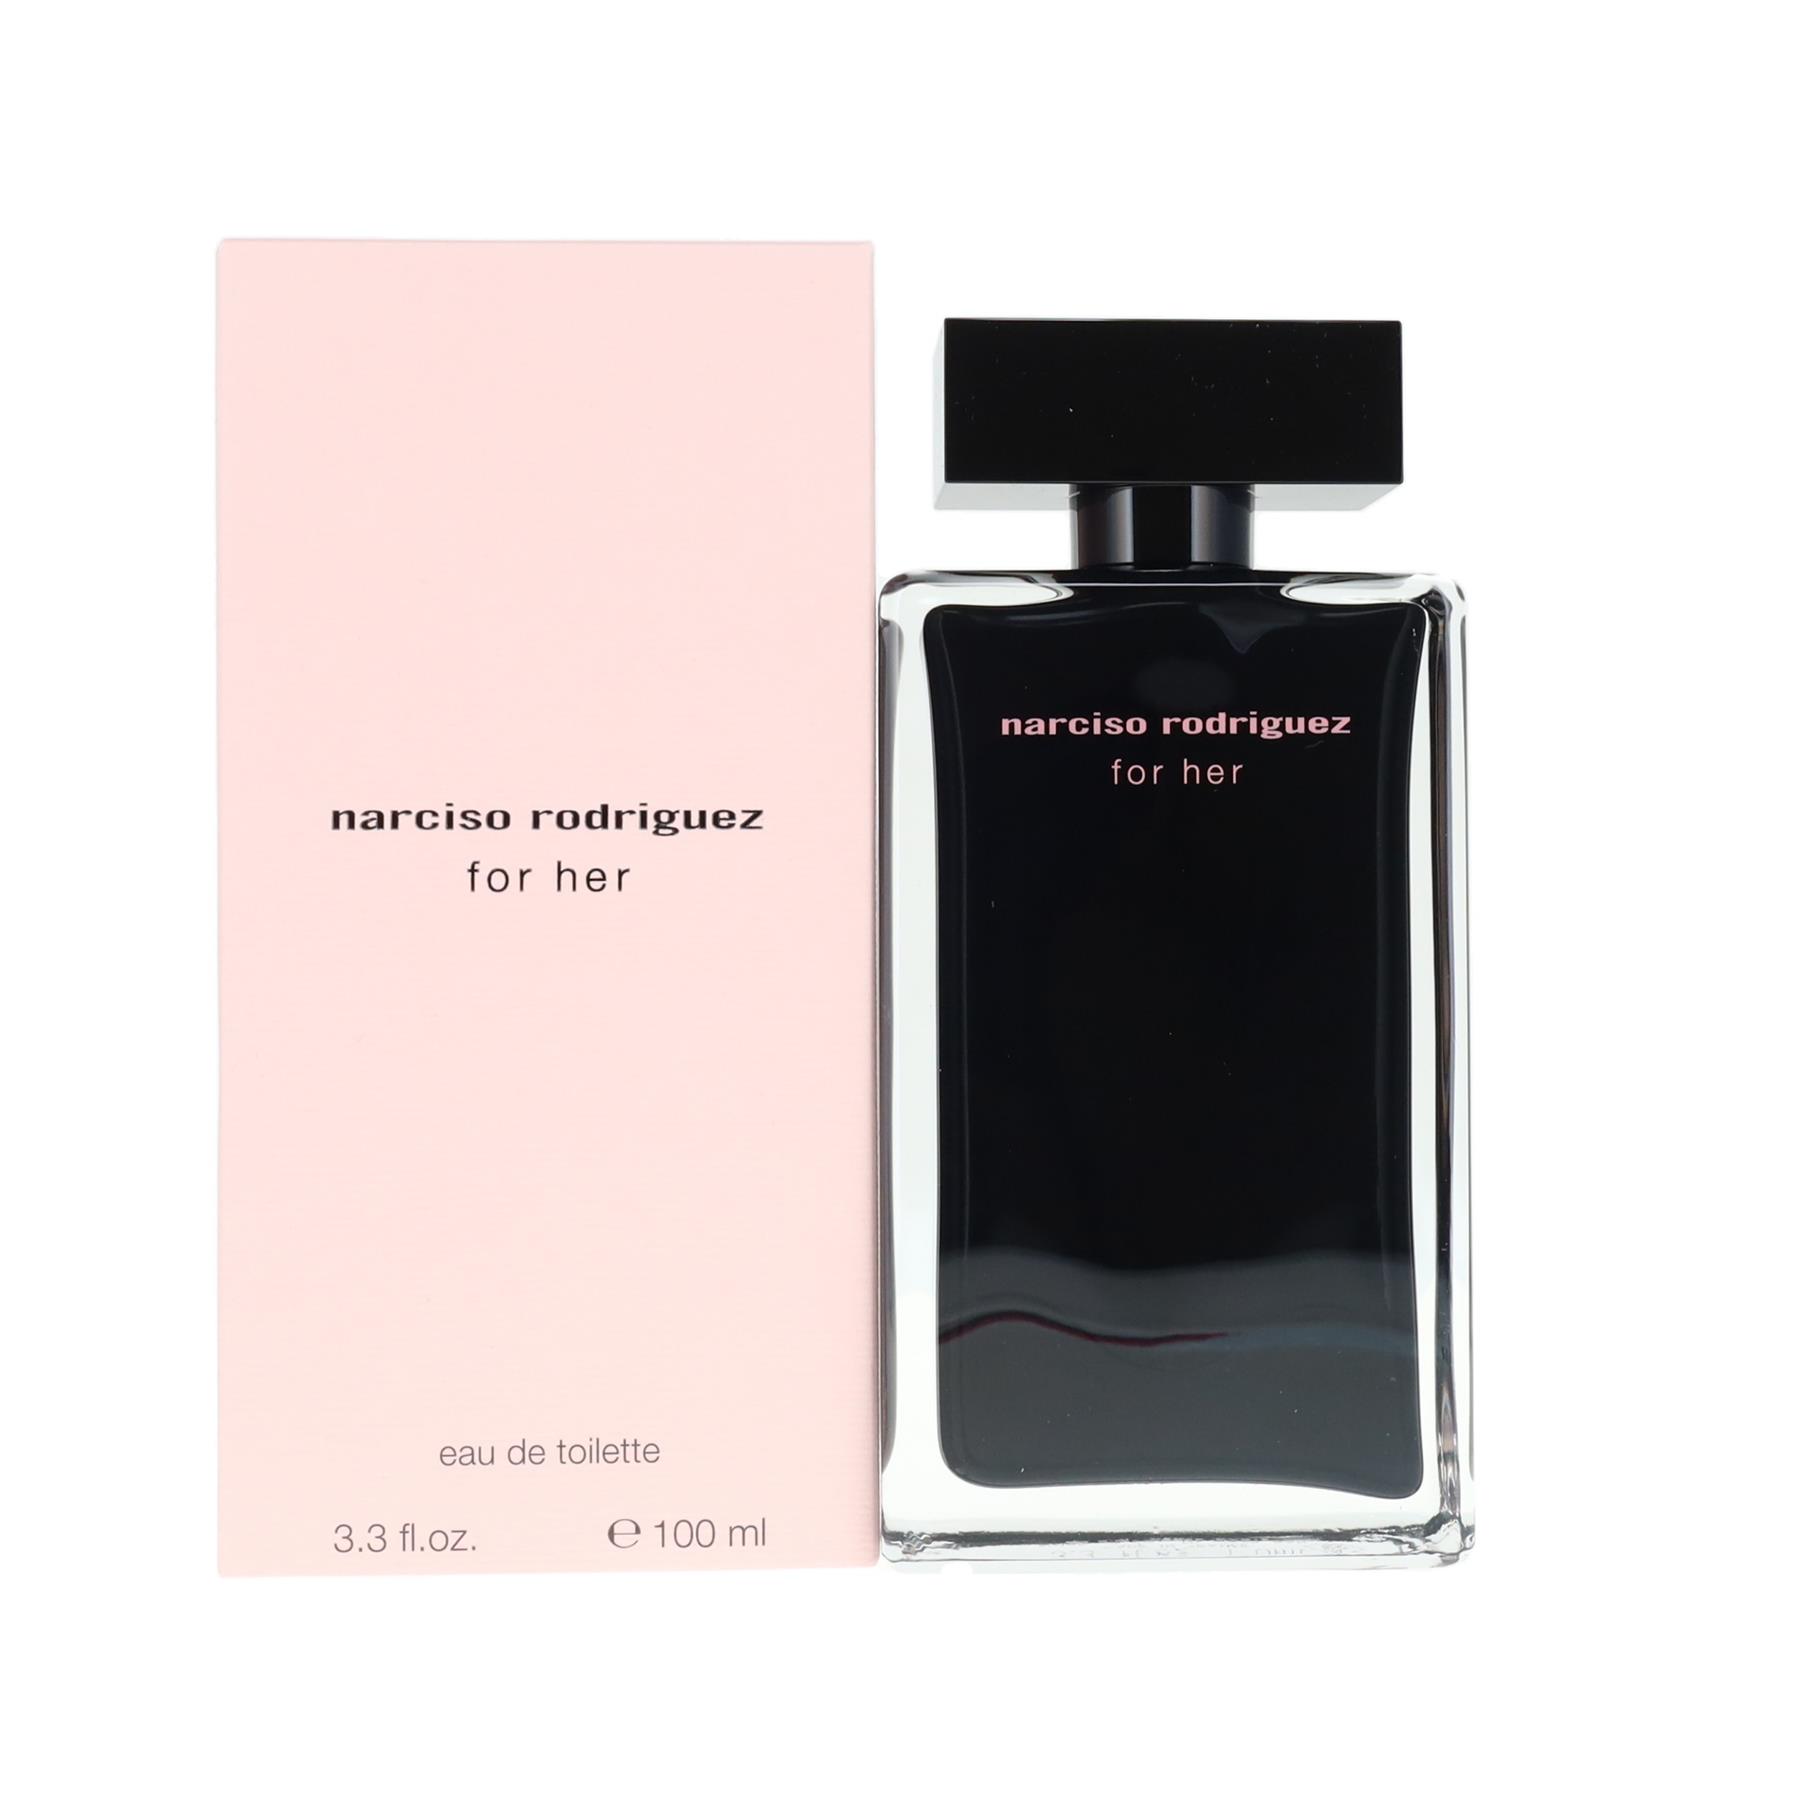 Narciso Rodriguez For Her 100ml Eau de Toilette Spray for Her from Perfume Plus Direct